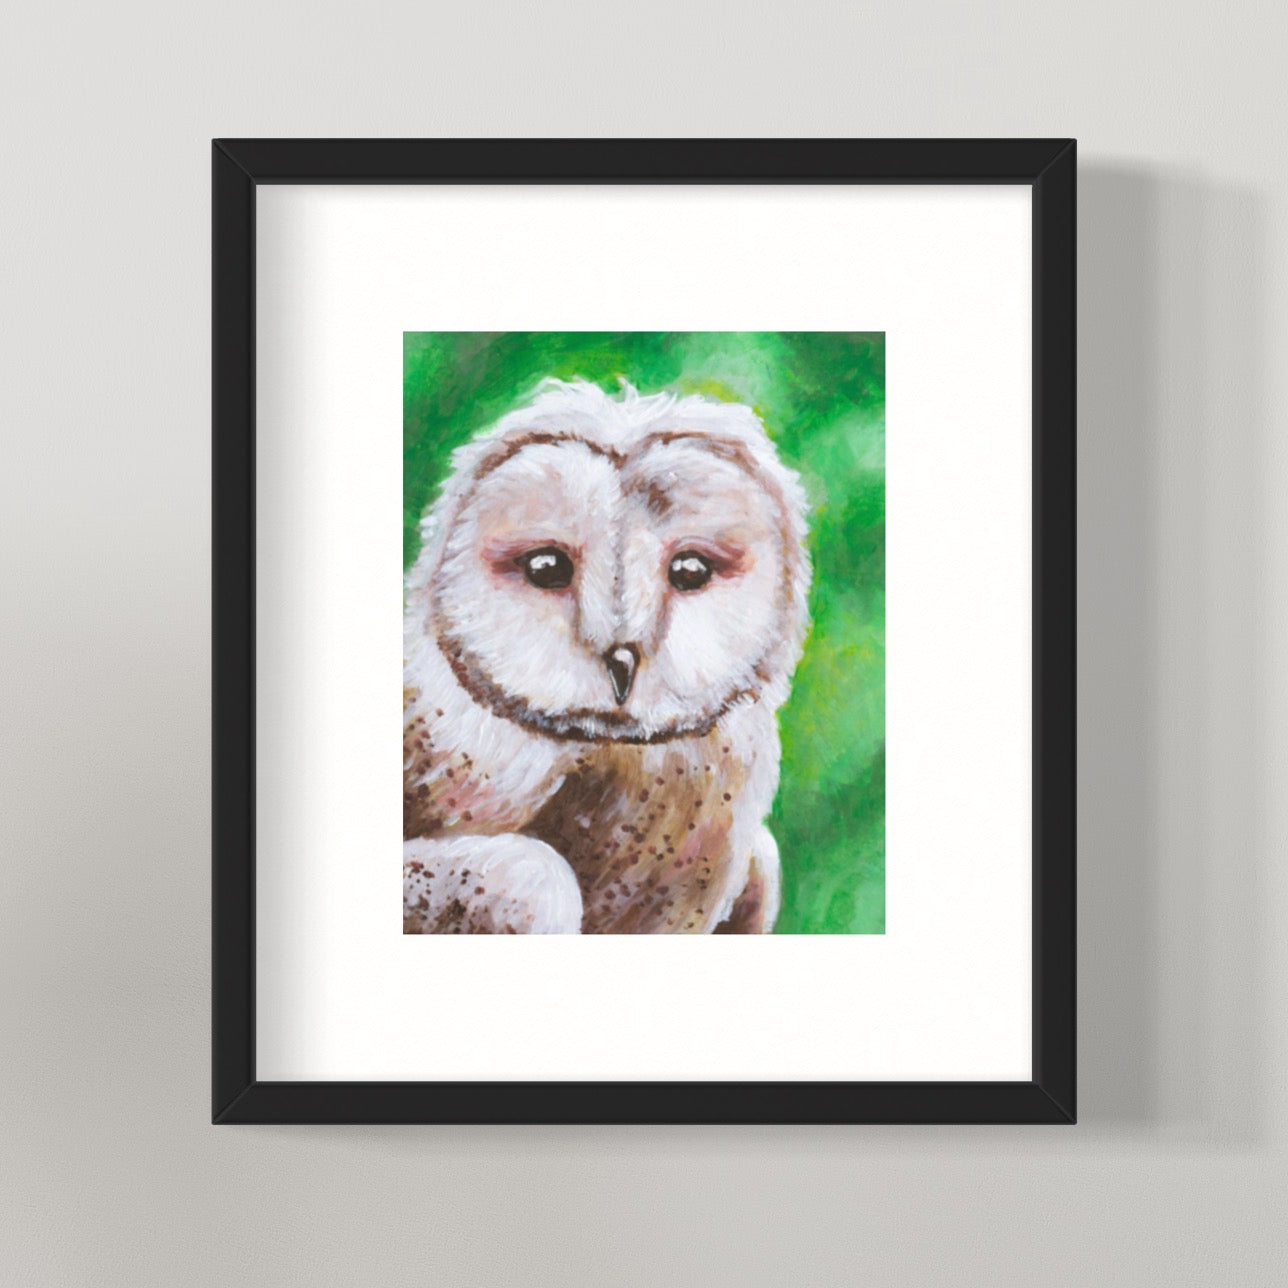 photo of framed Sitting Owl Painting